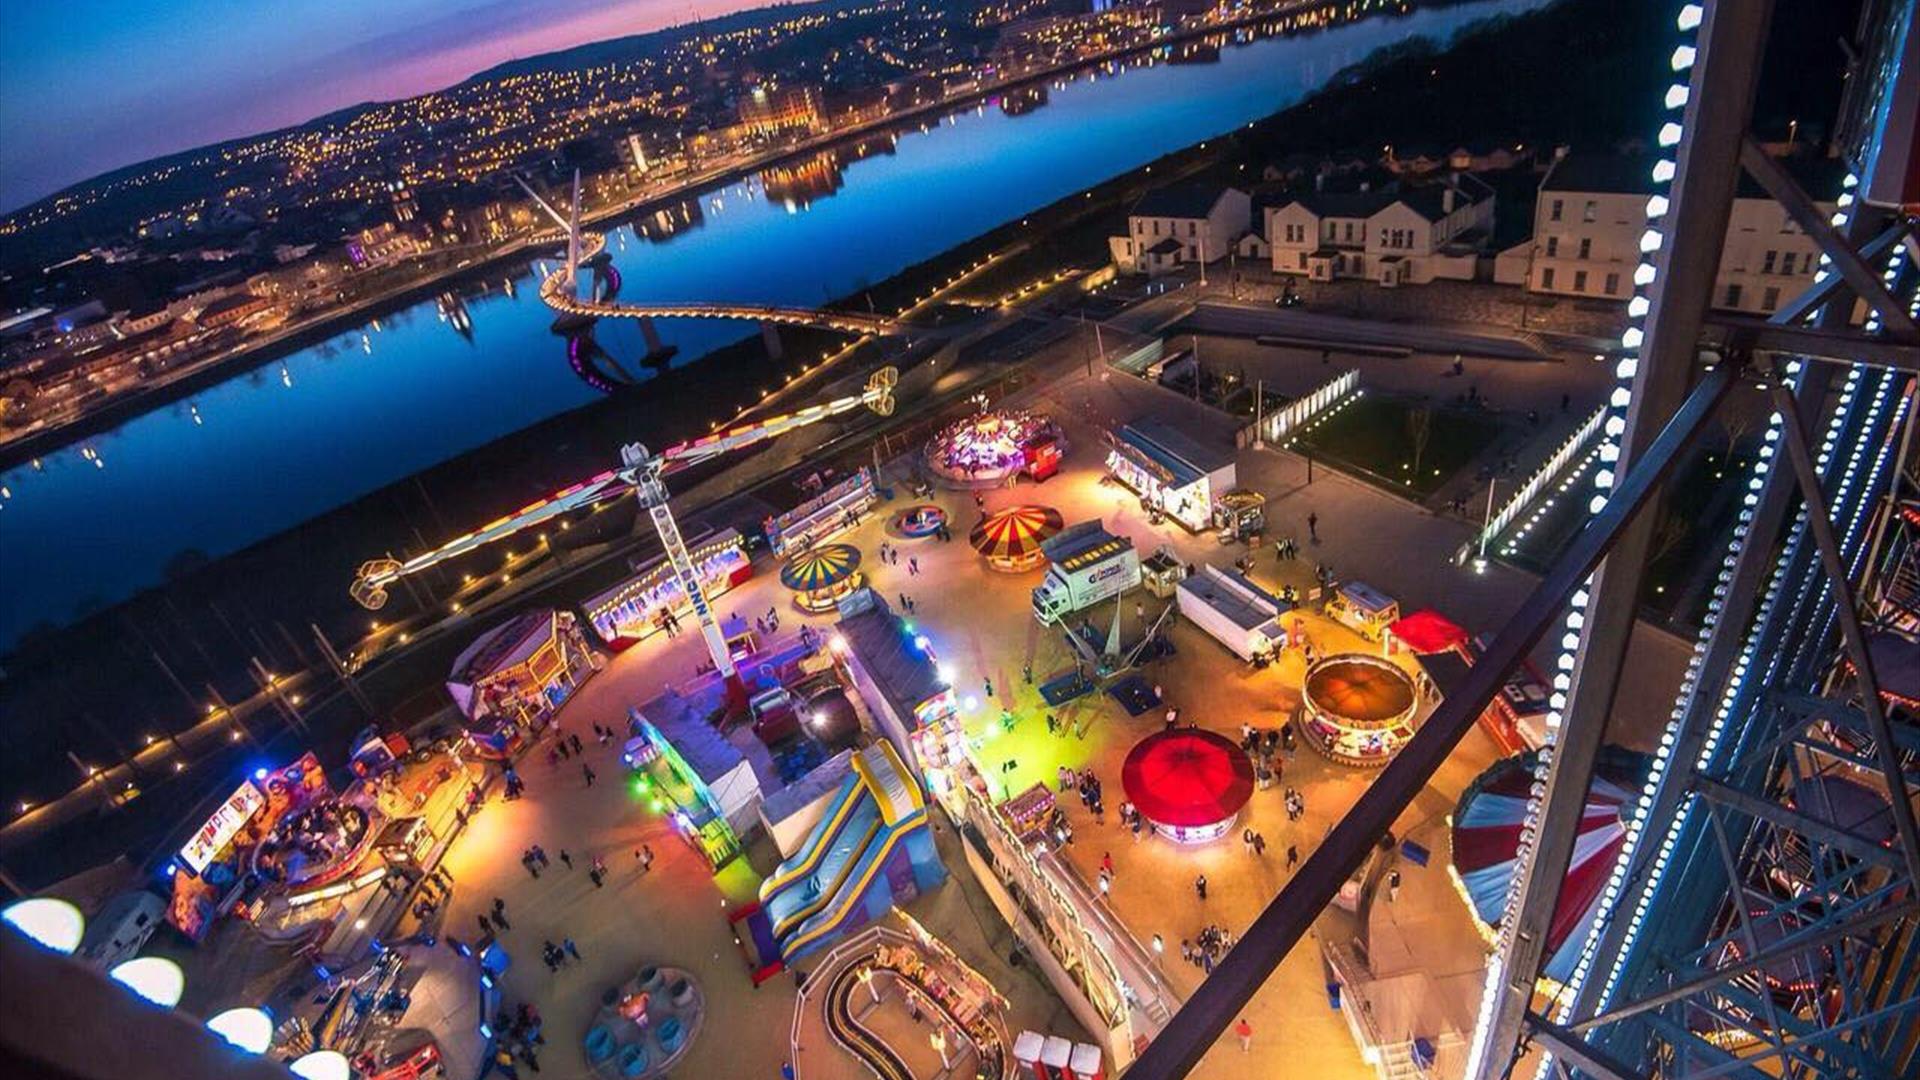 Birds eye view of a funfair beside a river at night-time.